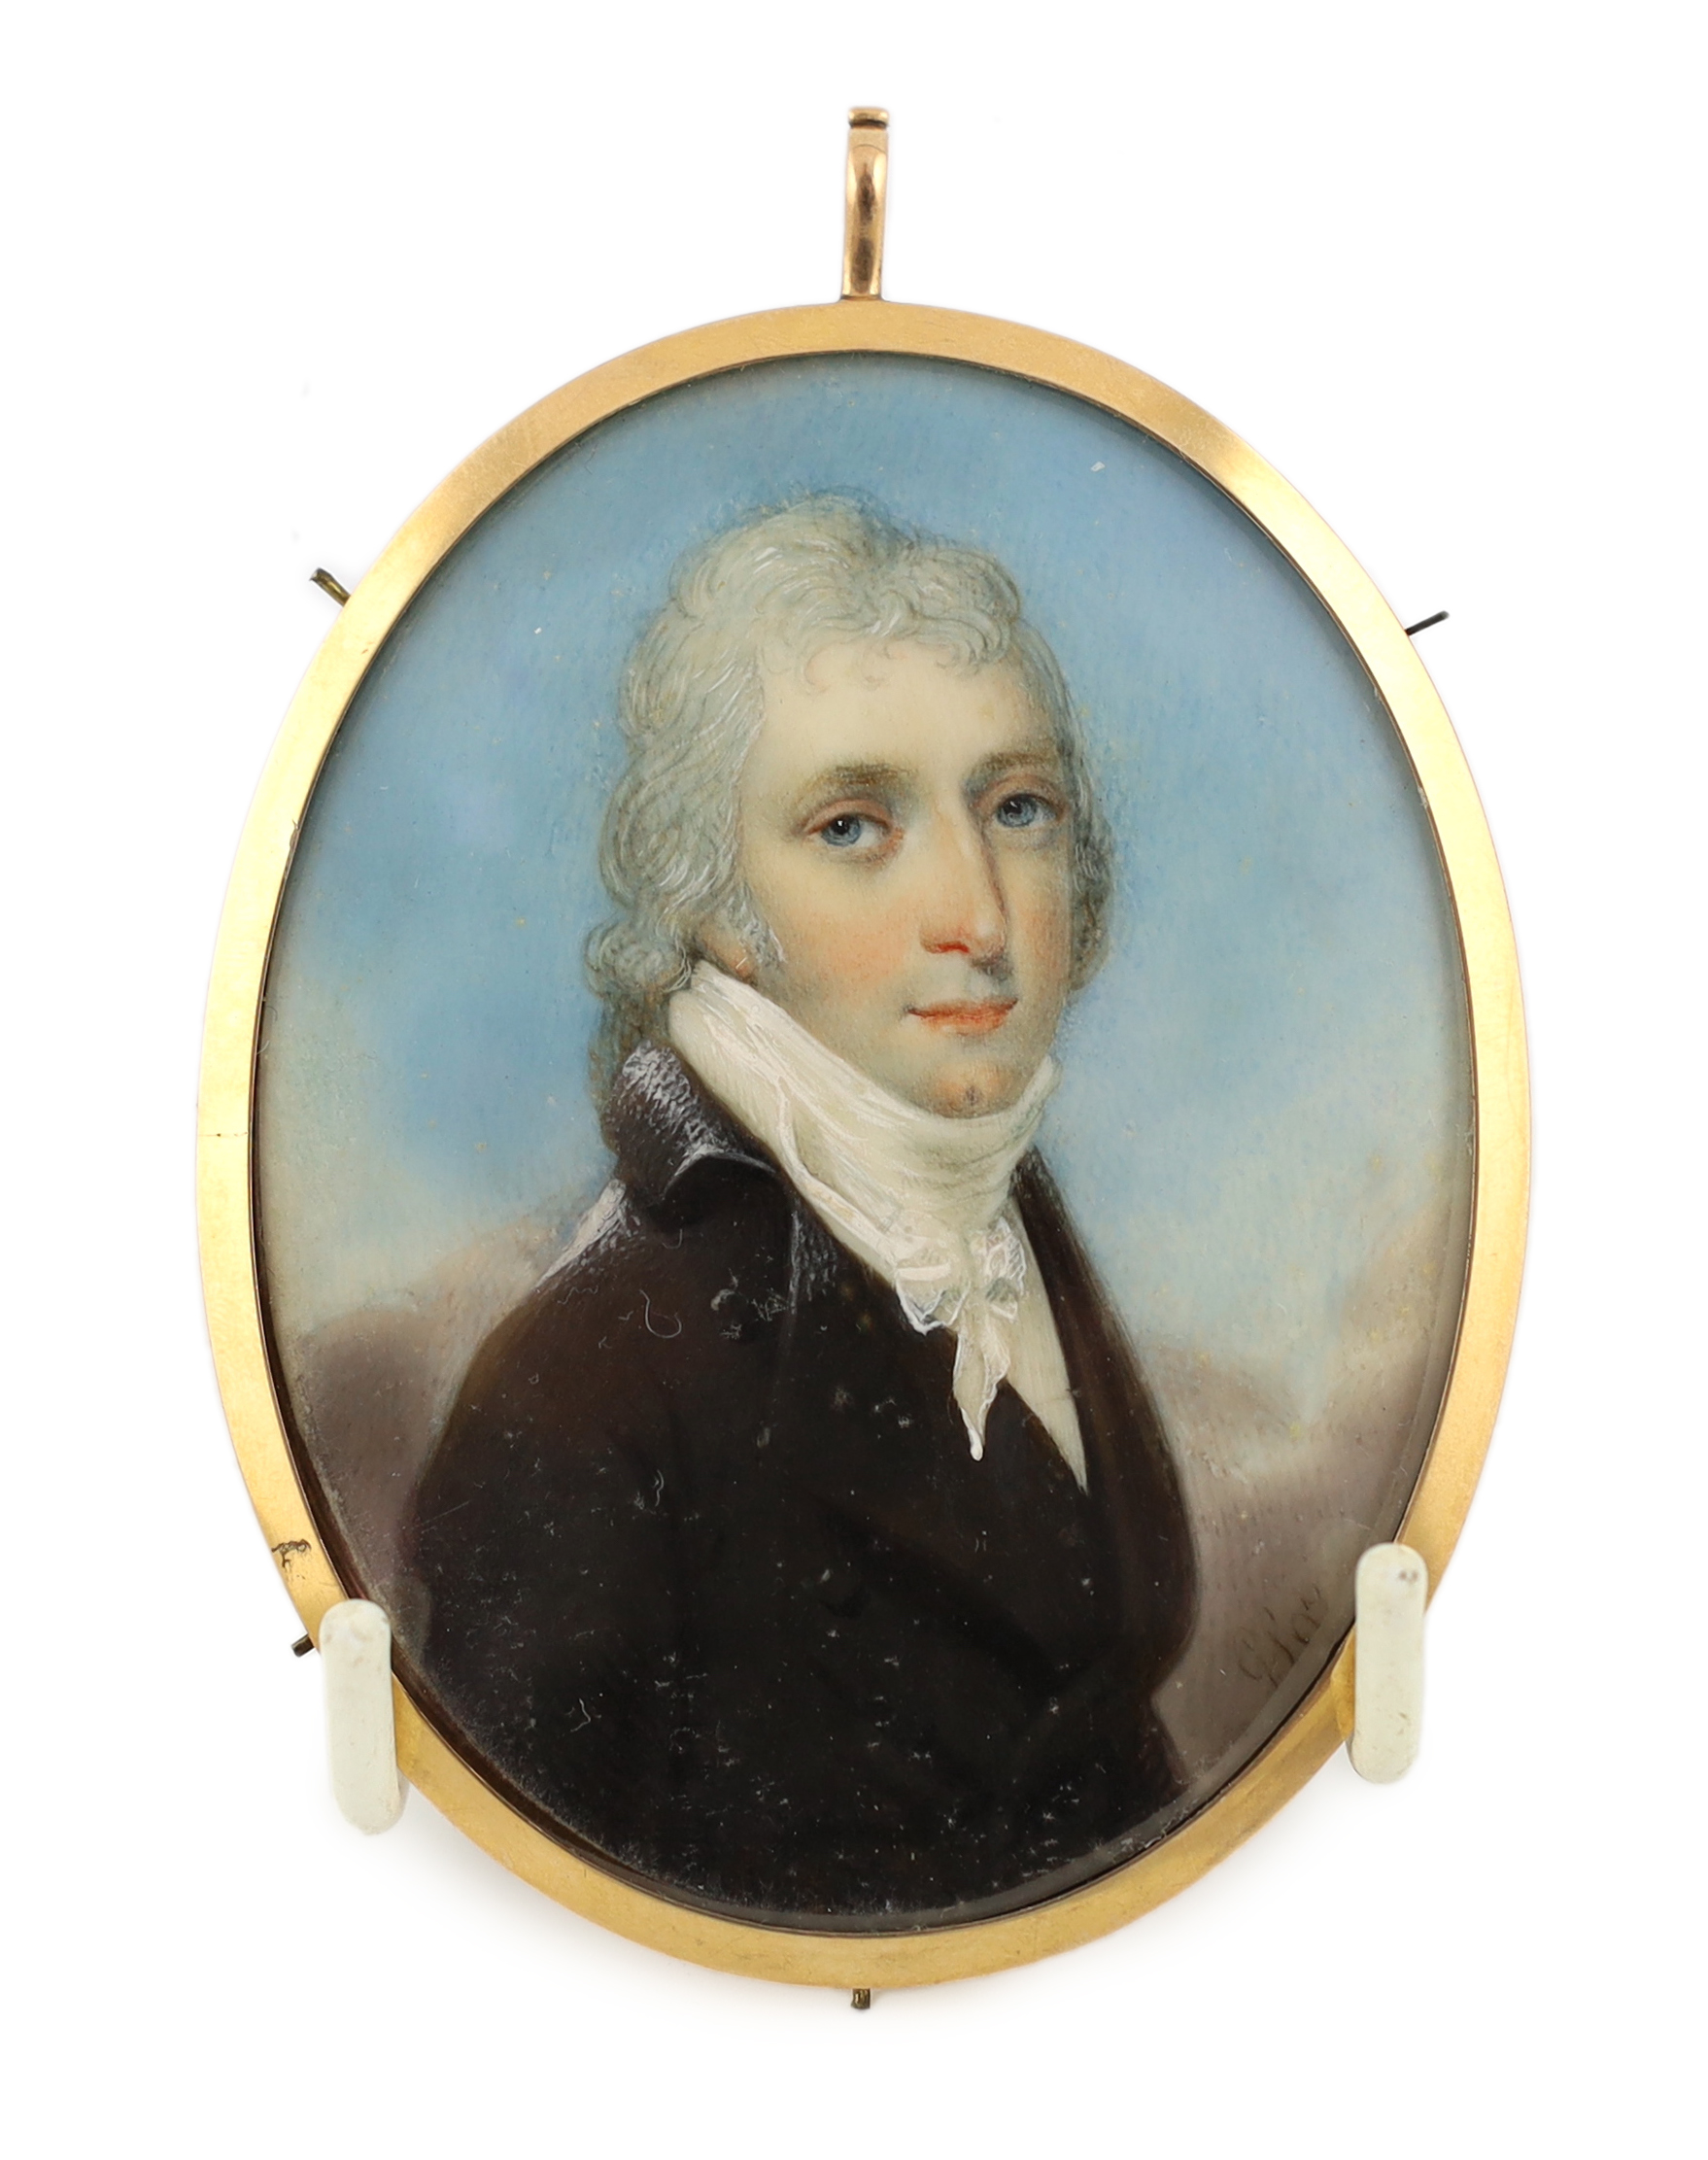 G.P. (1807) , Portrait miniature of a gentleman, watercolour on ivory, 8 x 6.2cm. CITES Submission reference YEAAMF4X